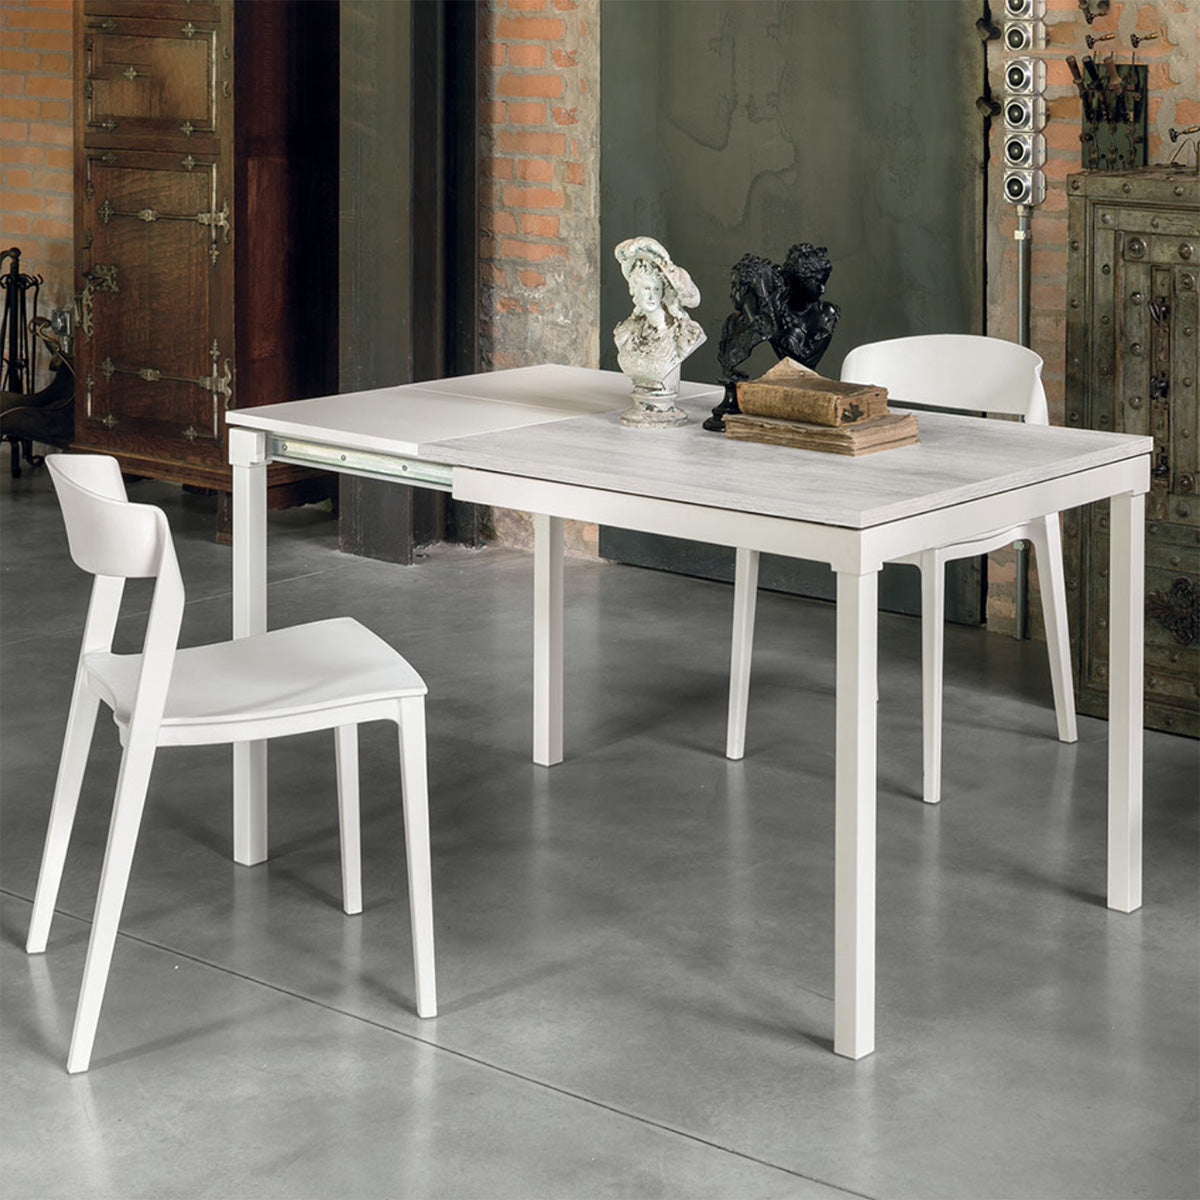 Perigeo 85 or 115 extending dining table by Target Point